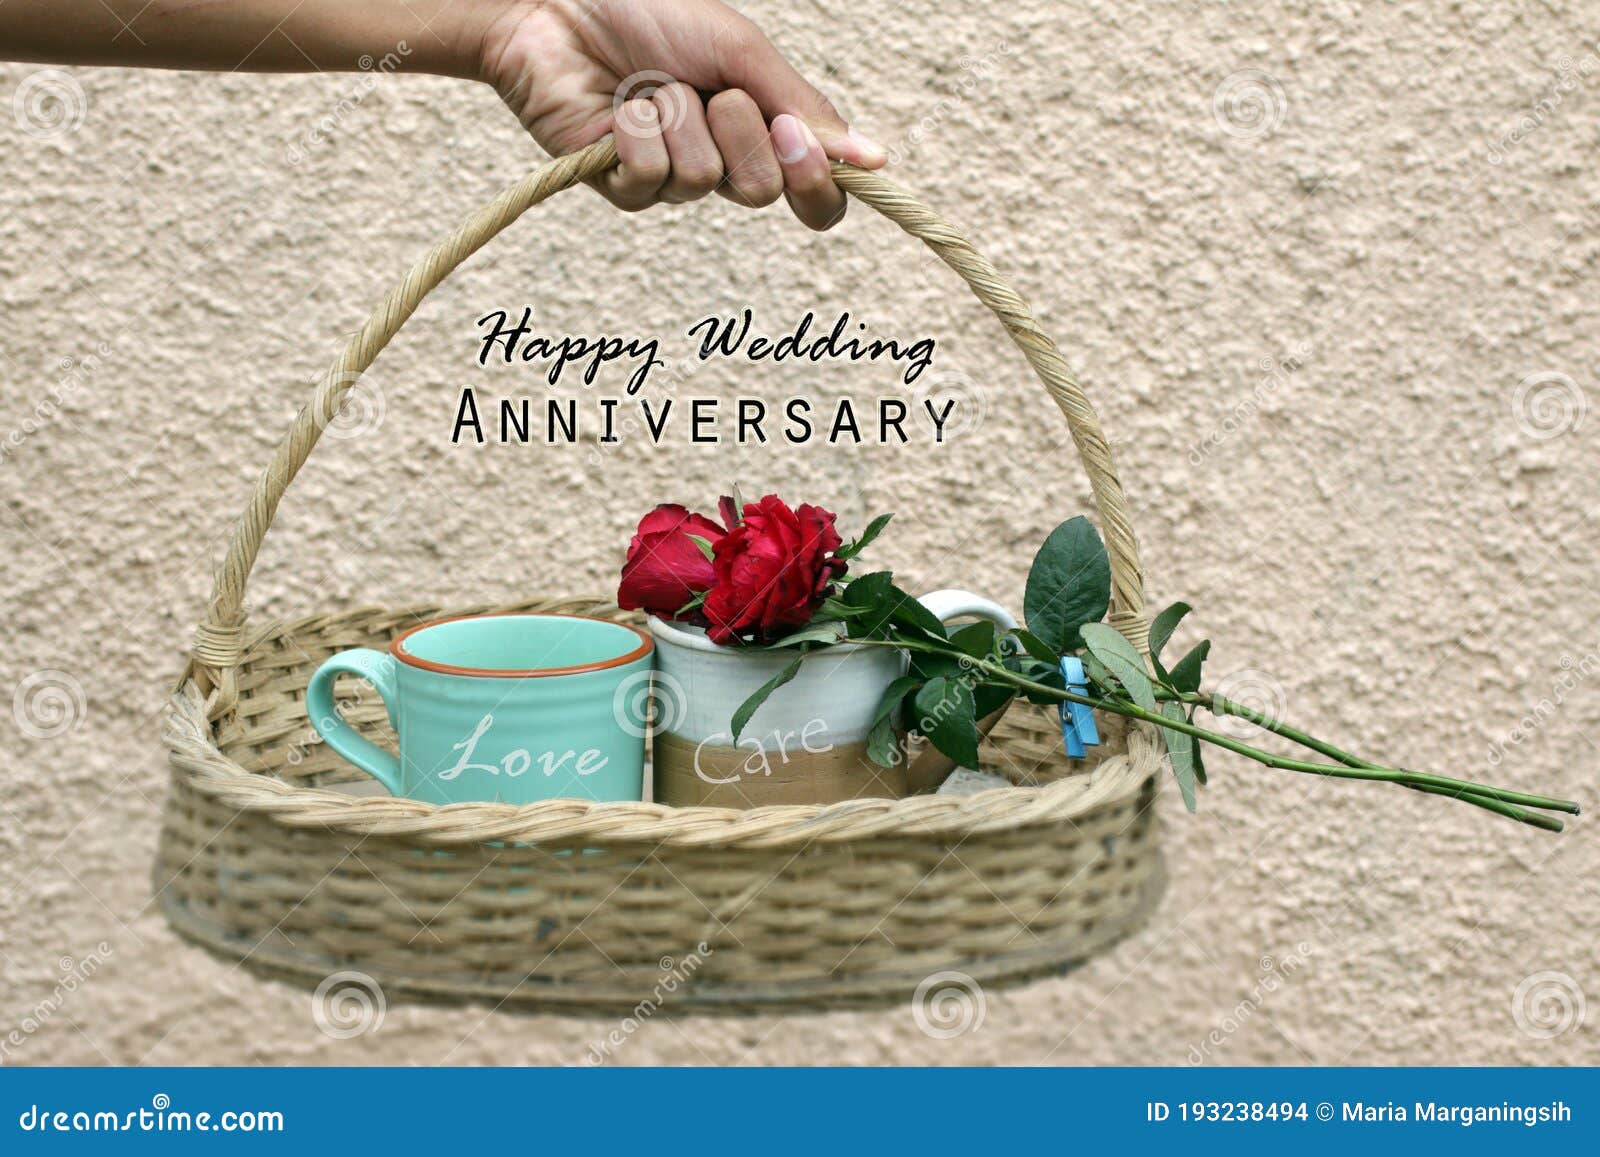 Happy Wedding Anniversary Card with Hand Holding Love and Care ...